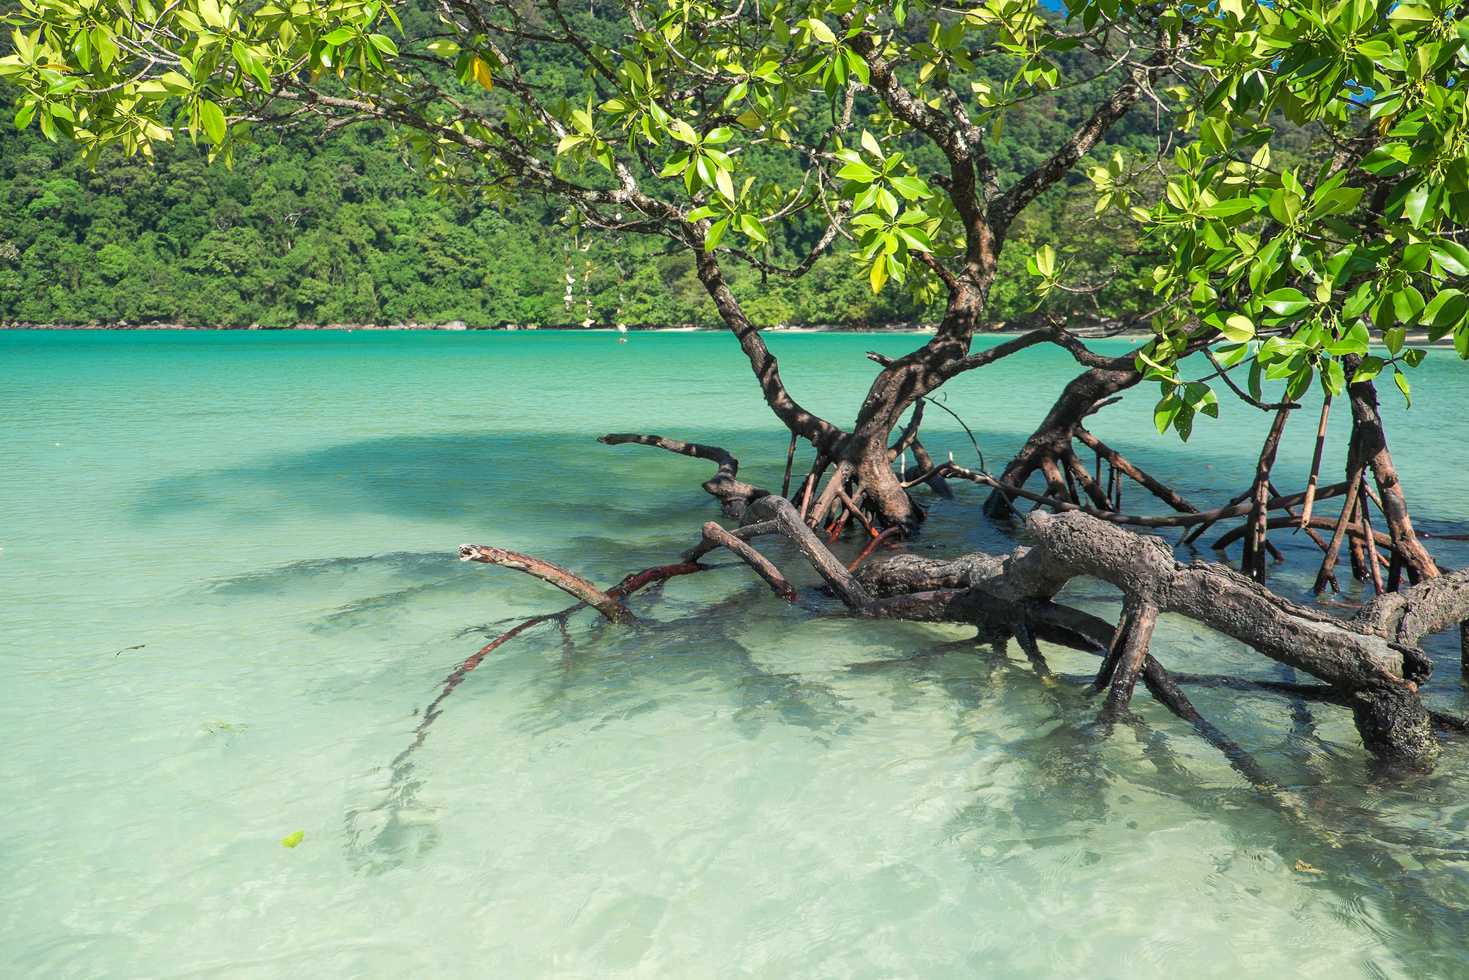 Mangrove is a nature based solution which Midori Climate Partner develops across Southeast Asia

#carboncredit #bluecarbon #sustaibility #climatefinance